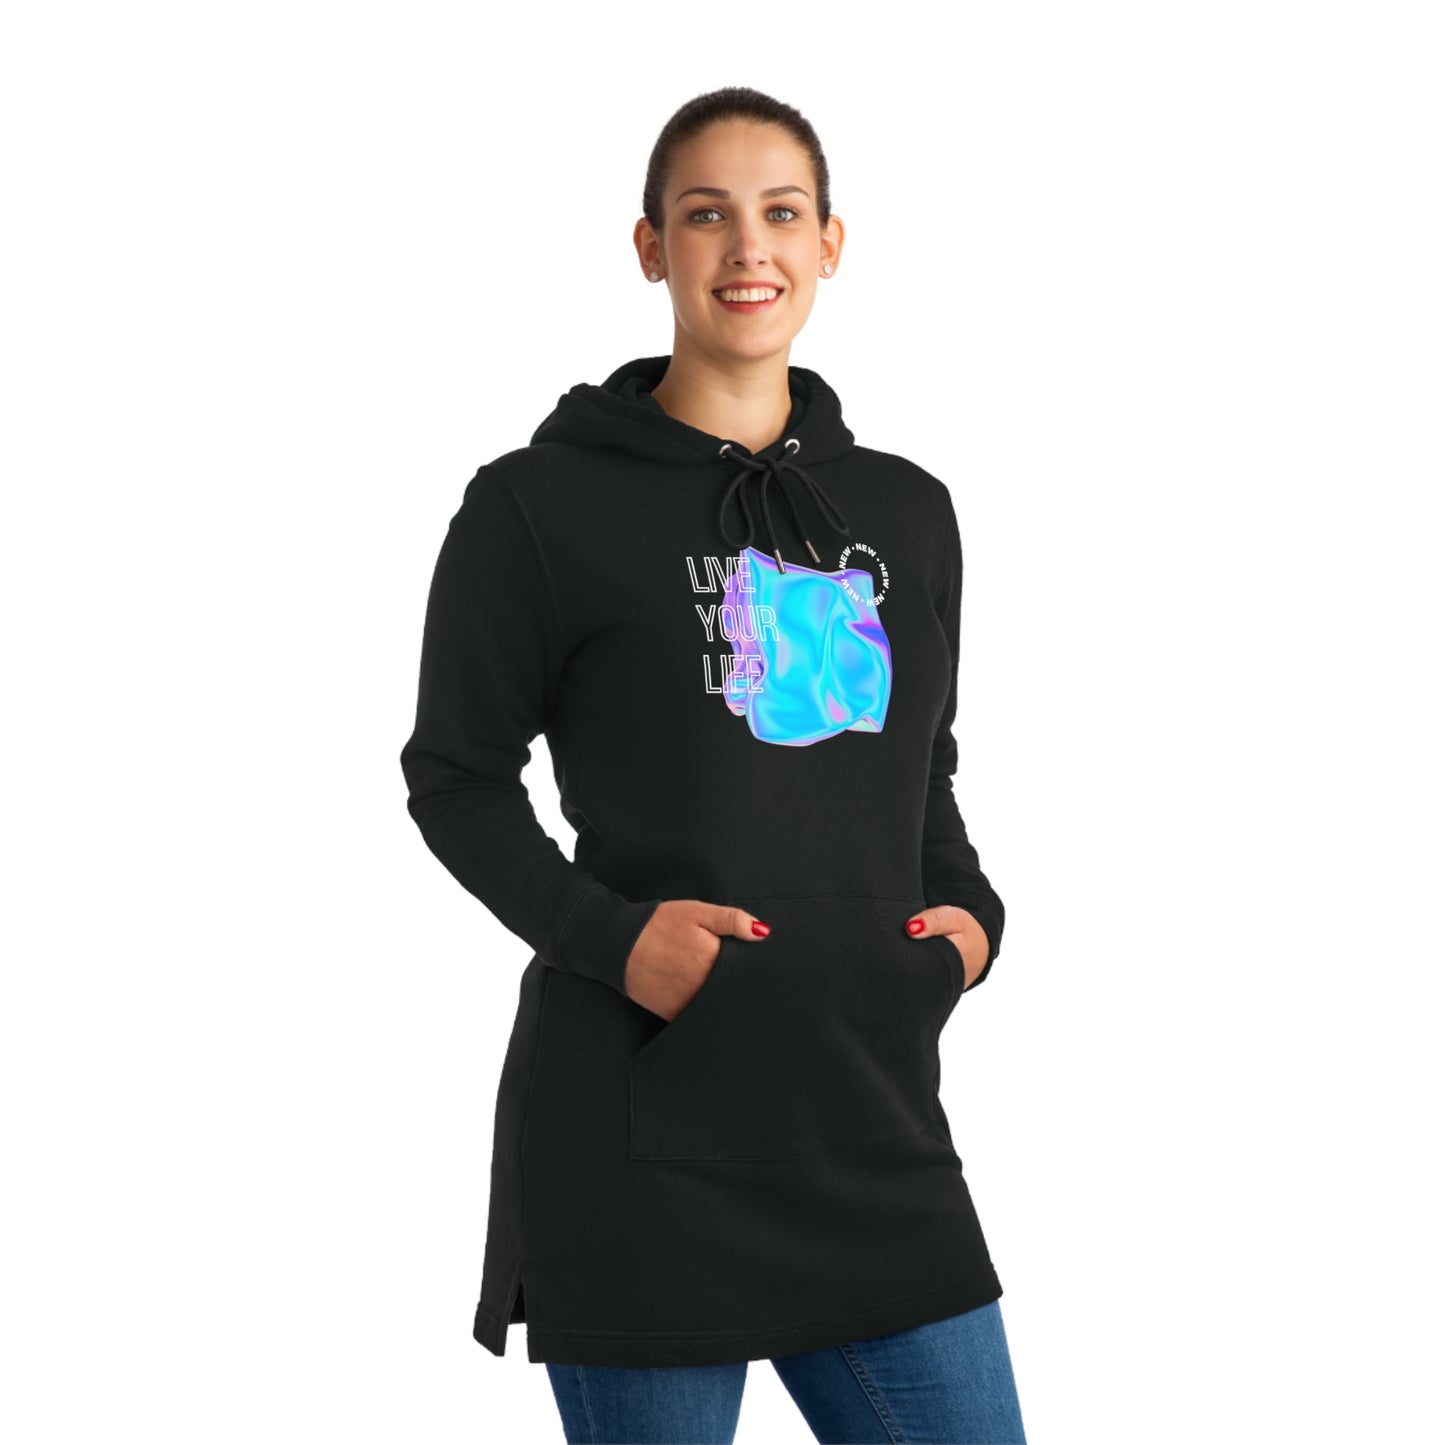 Vivid Existence Live Your Life Women's Hoodie Dress